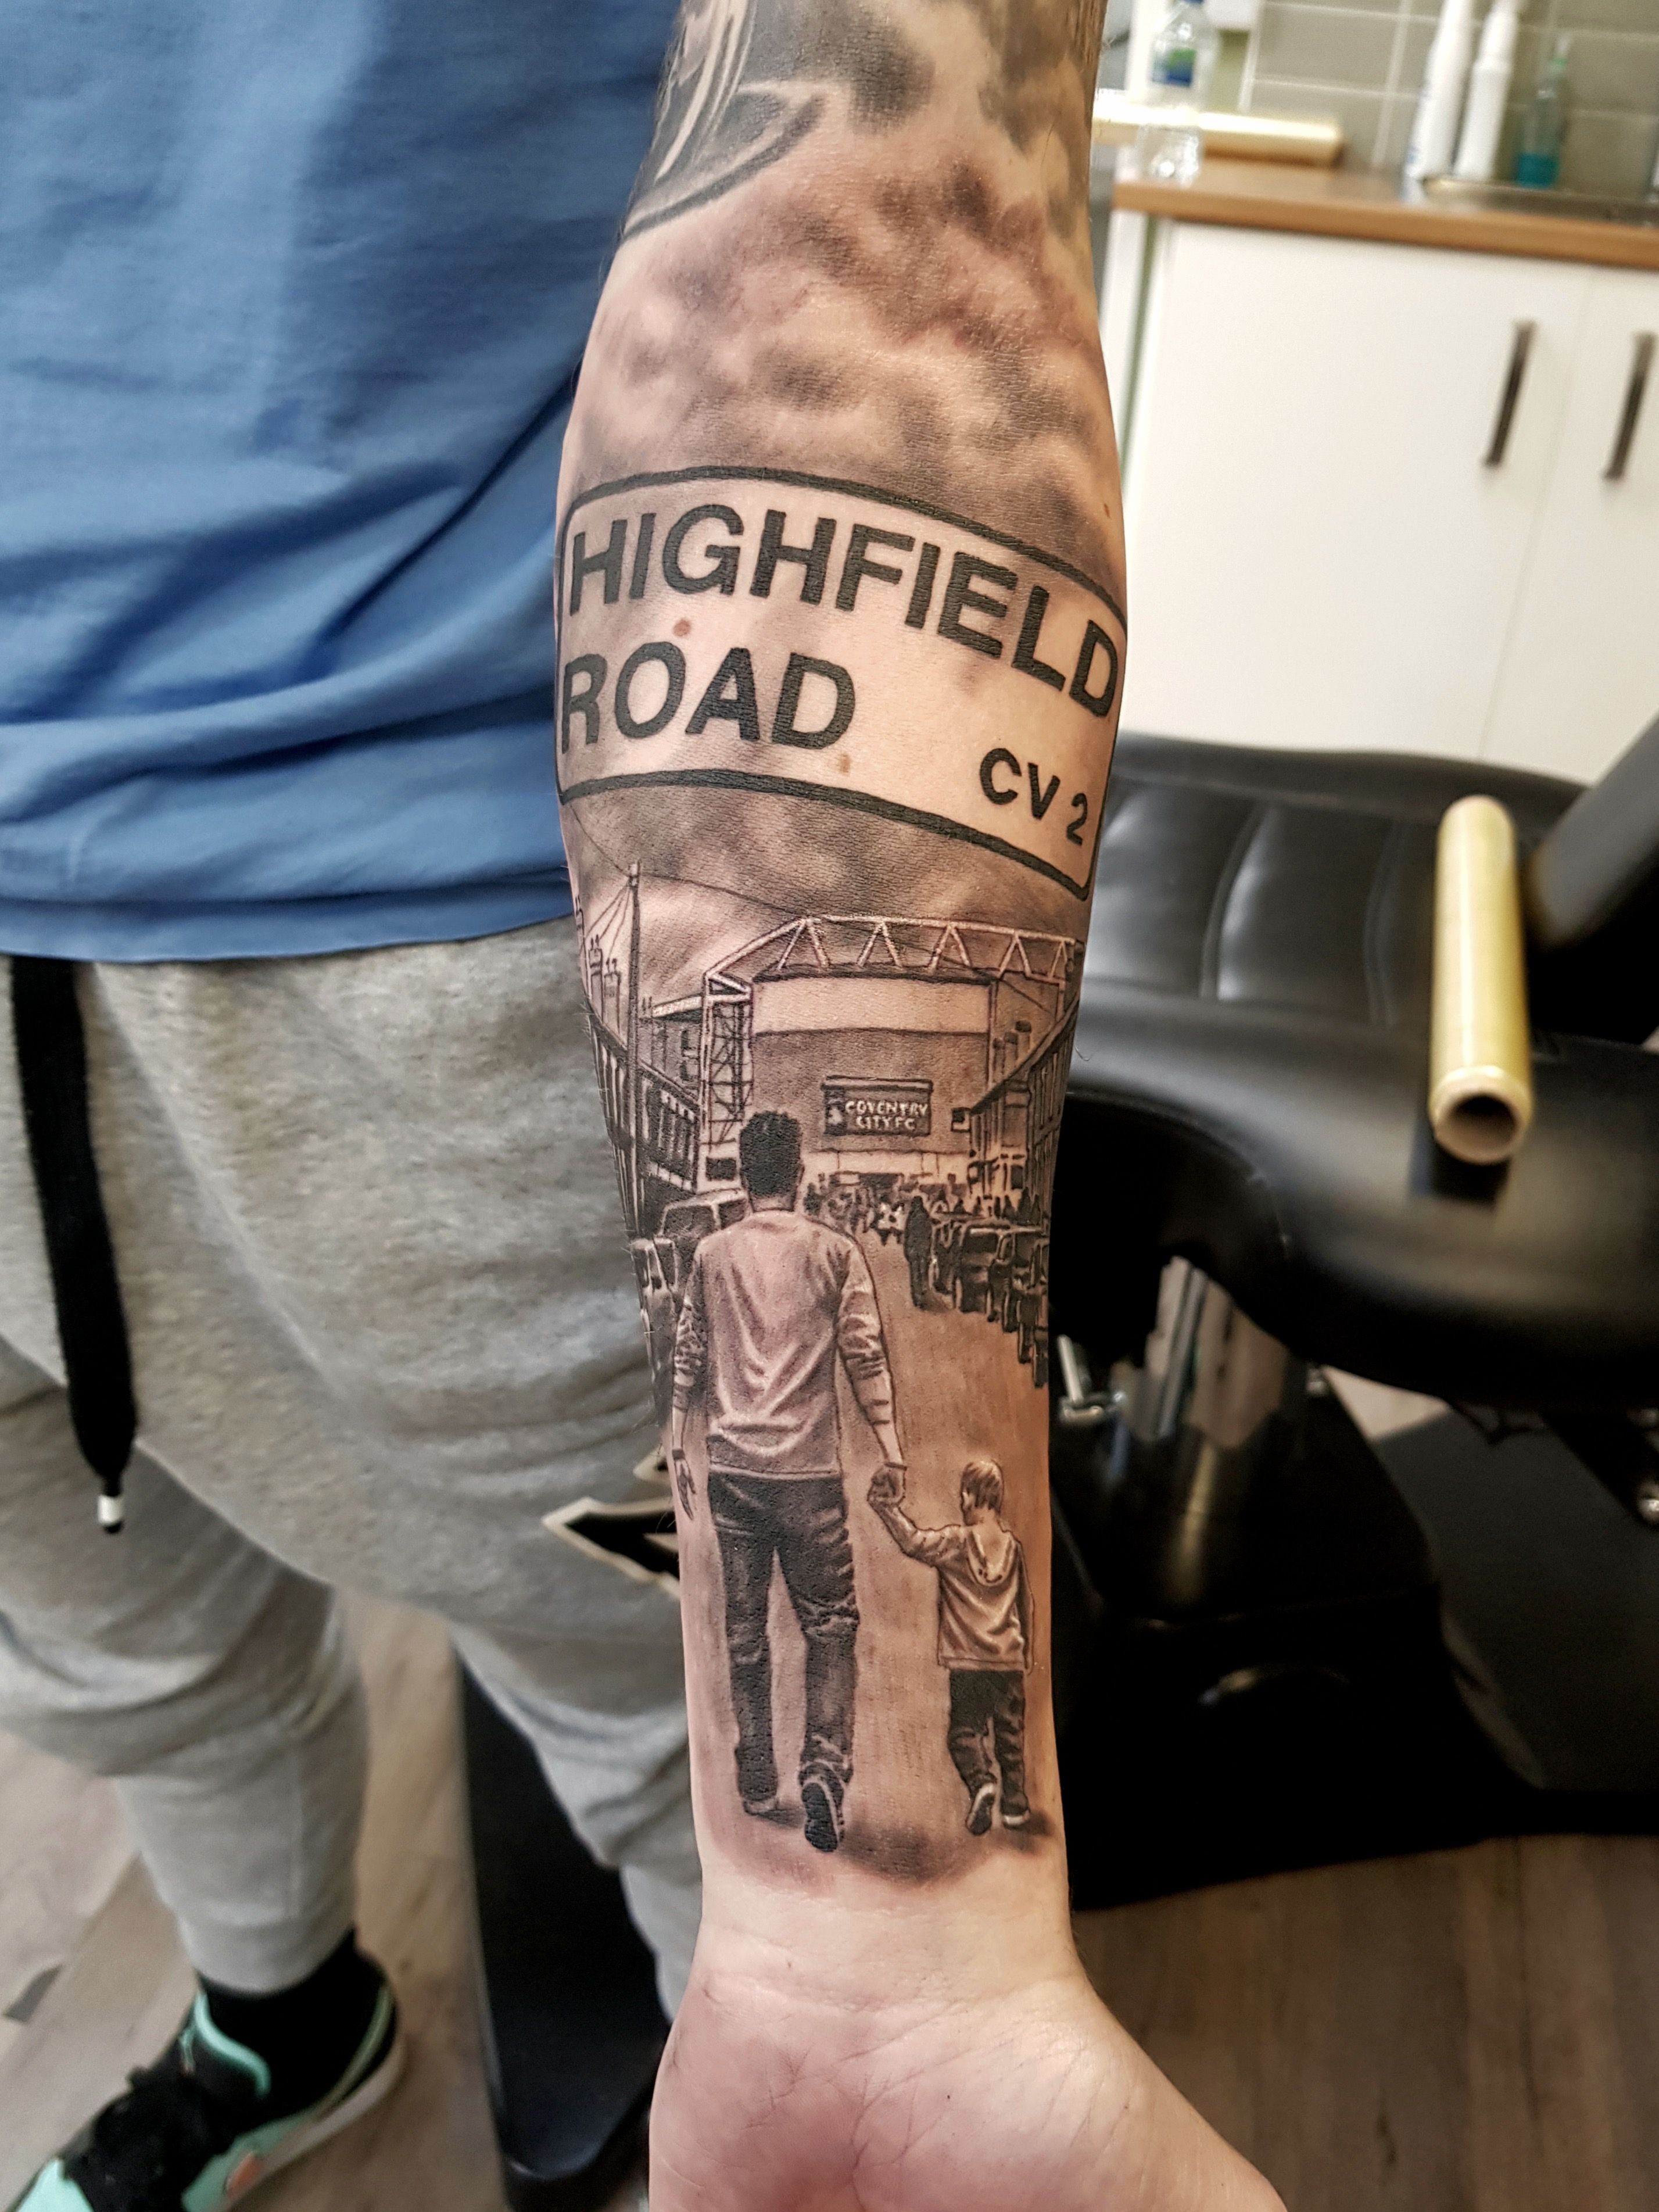 Alex Edwards Tattooing .London. on Tumblr: Highway to @tacobell 🌮 thanks  Jeremy for getting this one while you were in town! @kidsloveink_london # tattoo #tattoos...